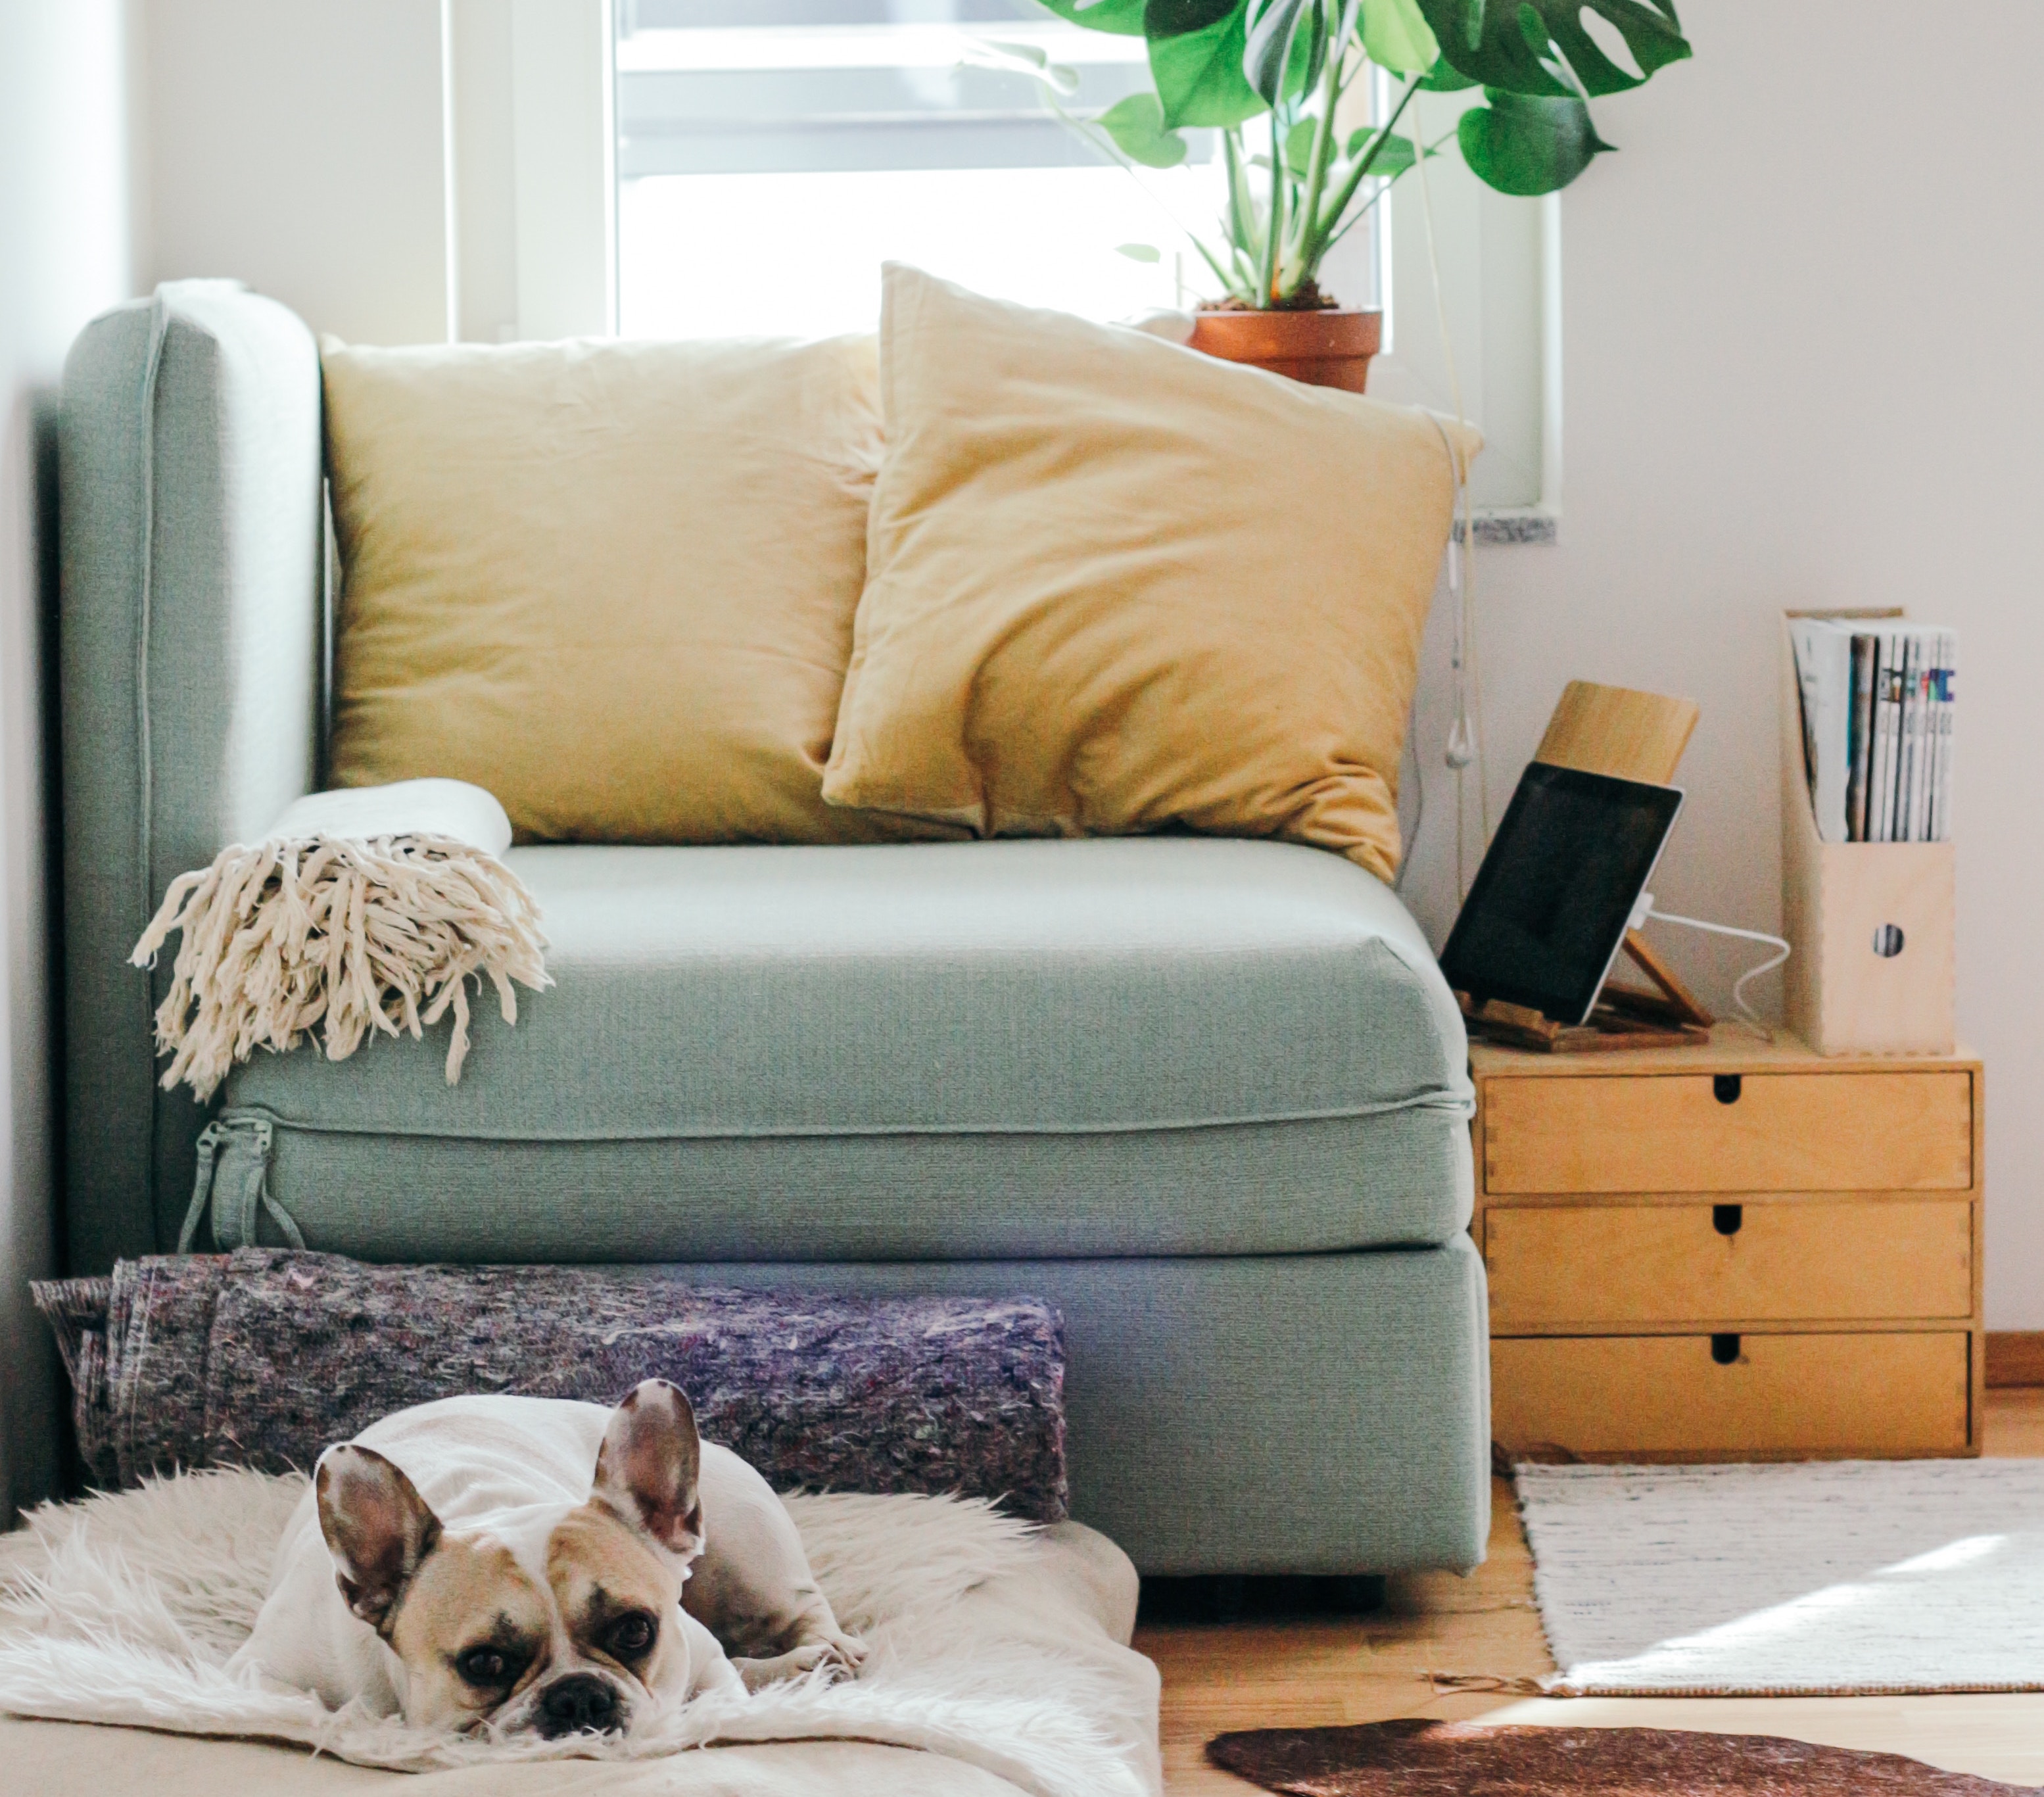 House interior with french bulldog on dog bed